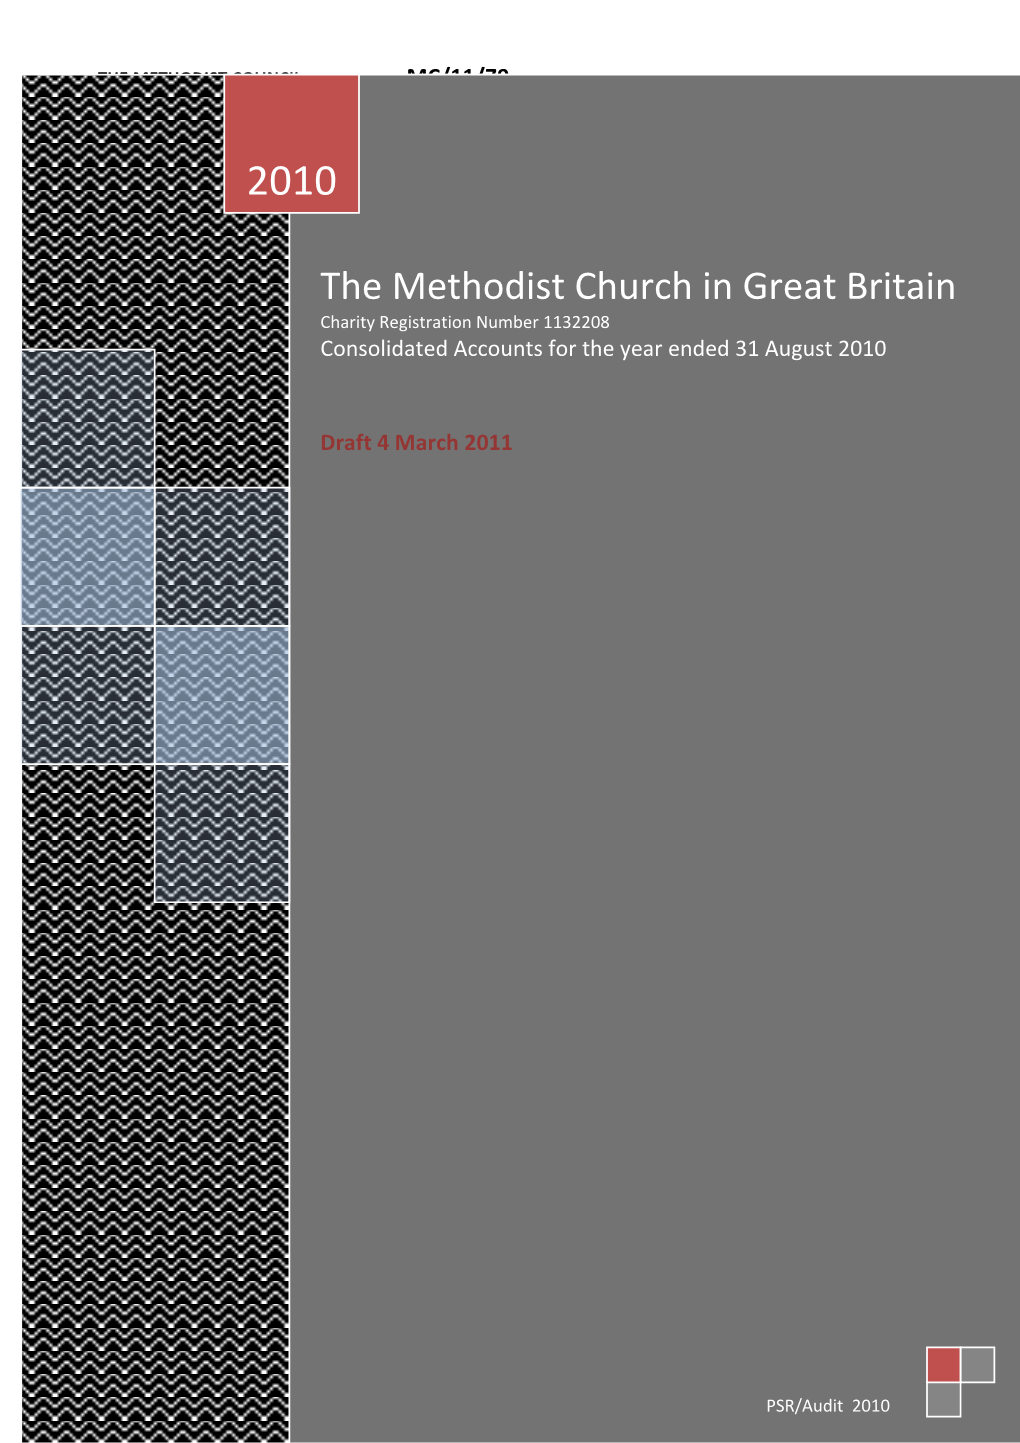 The Methodist Church in Great Britain Charity Registration Number 1132208